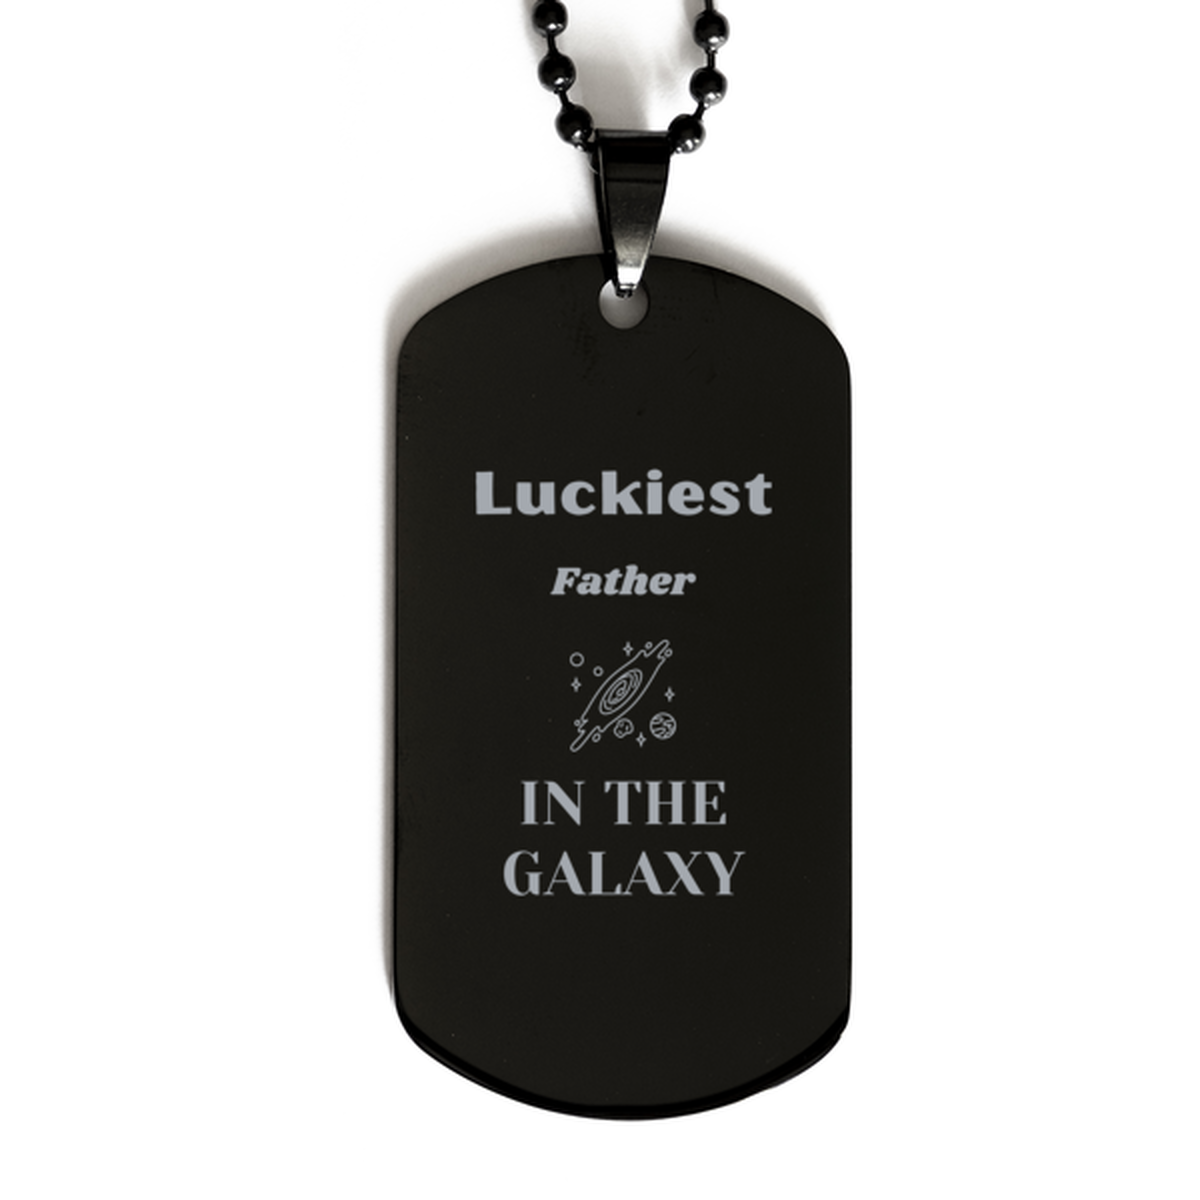 Luckiest Father in the Galaxy, To My Father Engraved Gifts, Christmas Father Black Dog Tag Gifts, X-mas Birthday Unique Gifts For Father Men Women